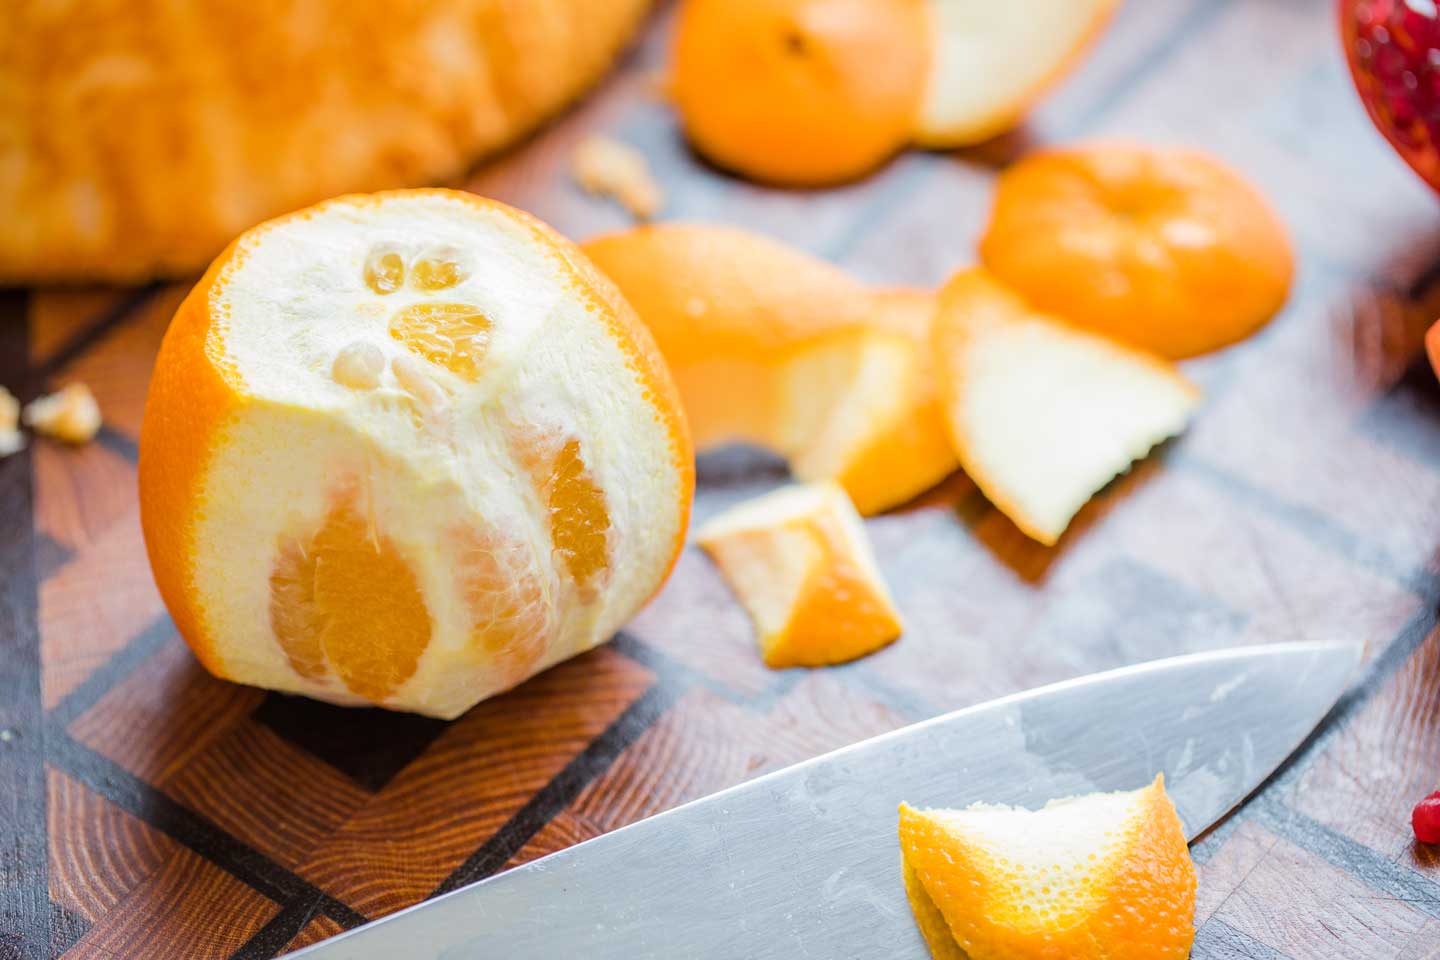 an orange on a wooden cutting board, with a chef's knife that has just started removing the orange peel through vertical cuts